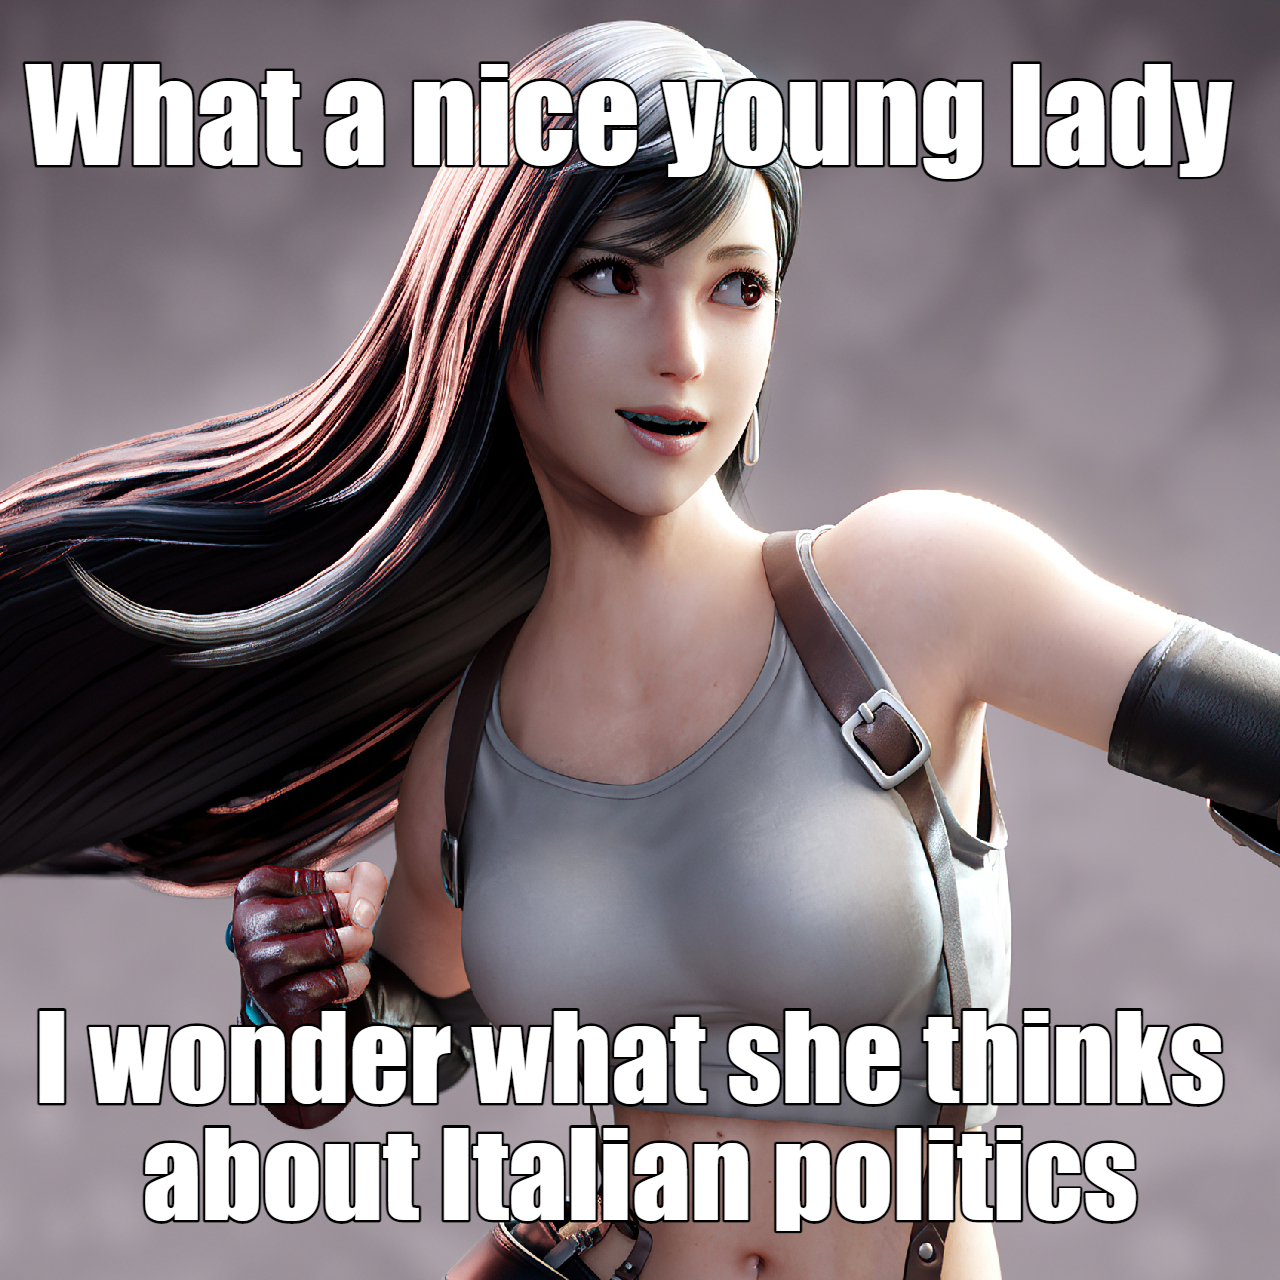 funny gaming memes - tifa lockhart sculpture - What a nice young lady I wonder what she thinks about Italian politics